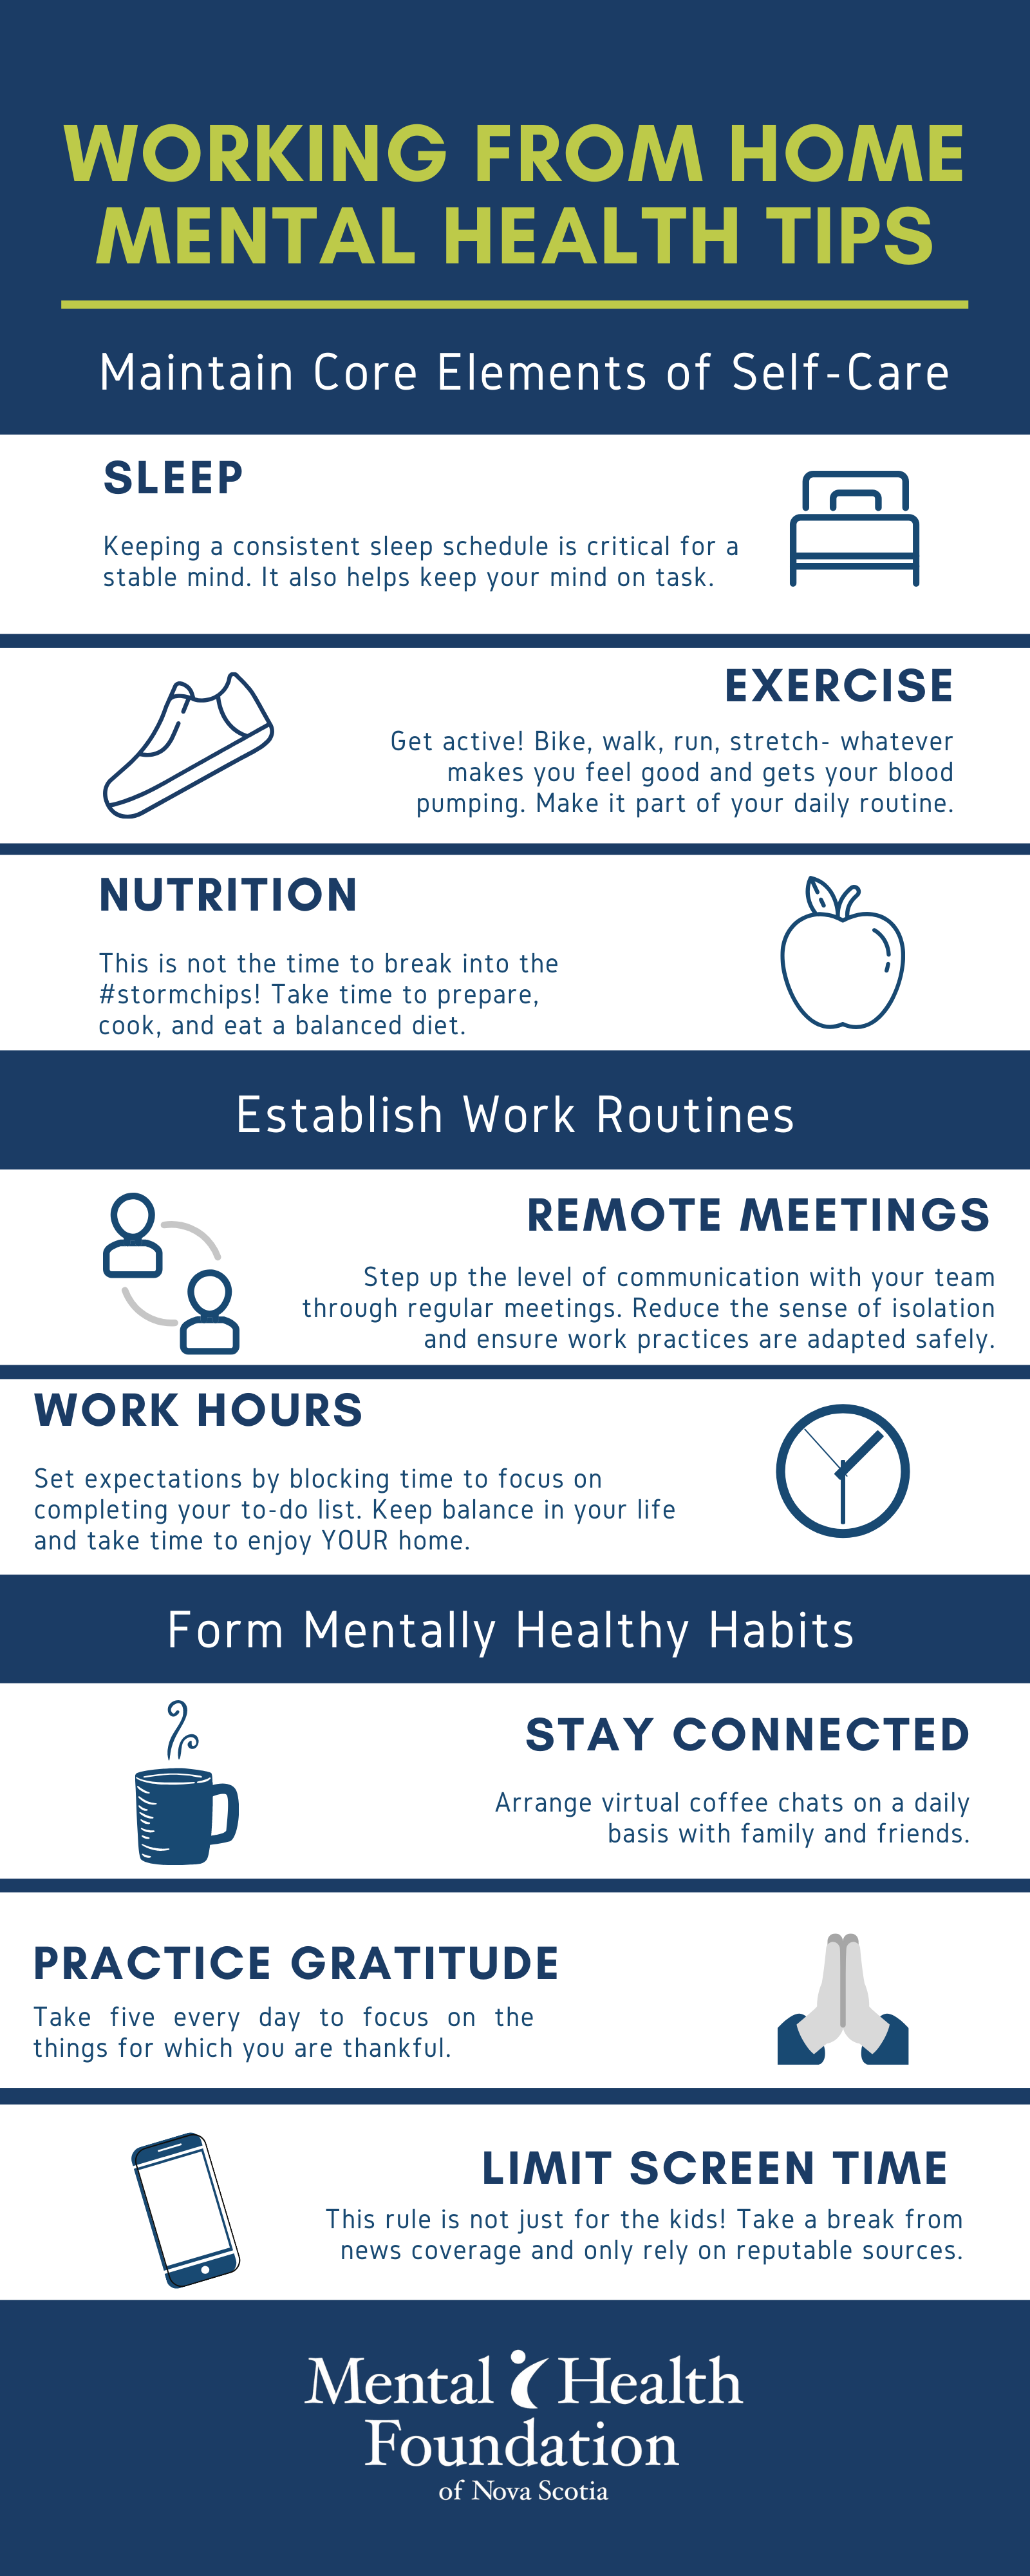 Work From Home Wellness Tips to Maintain Work-life Balance